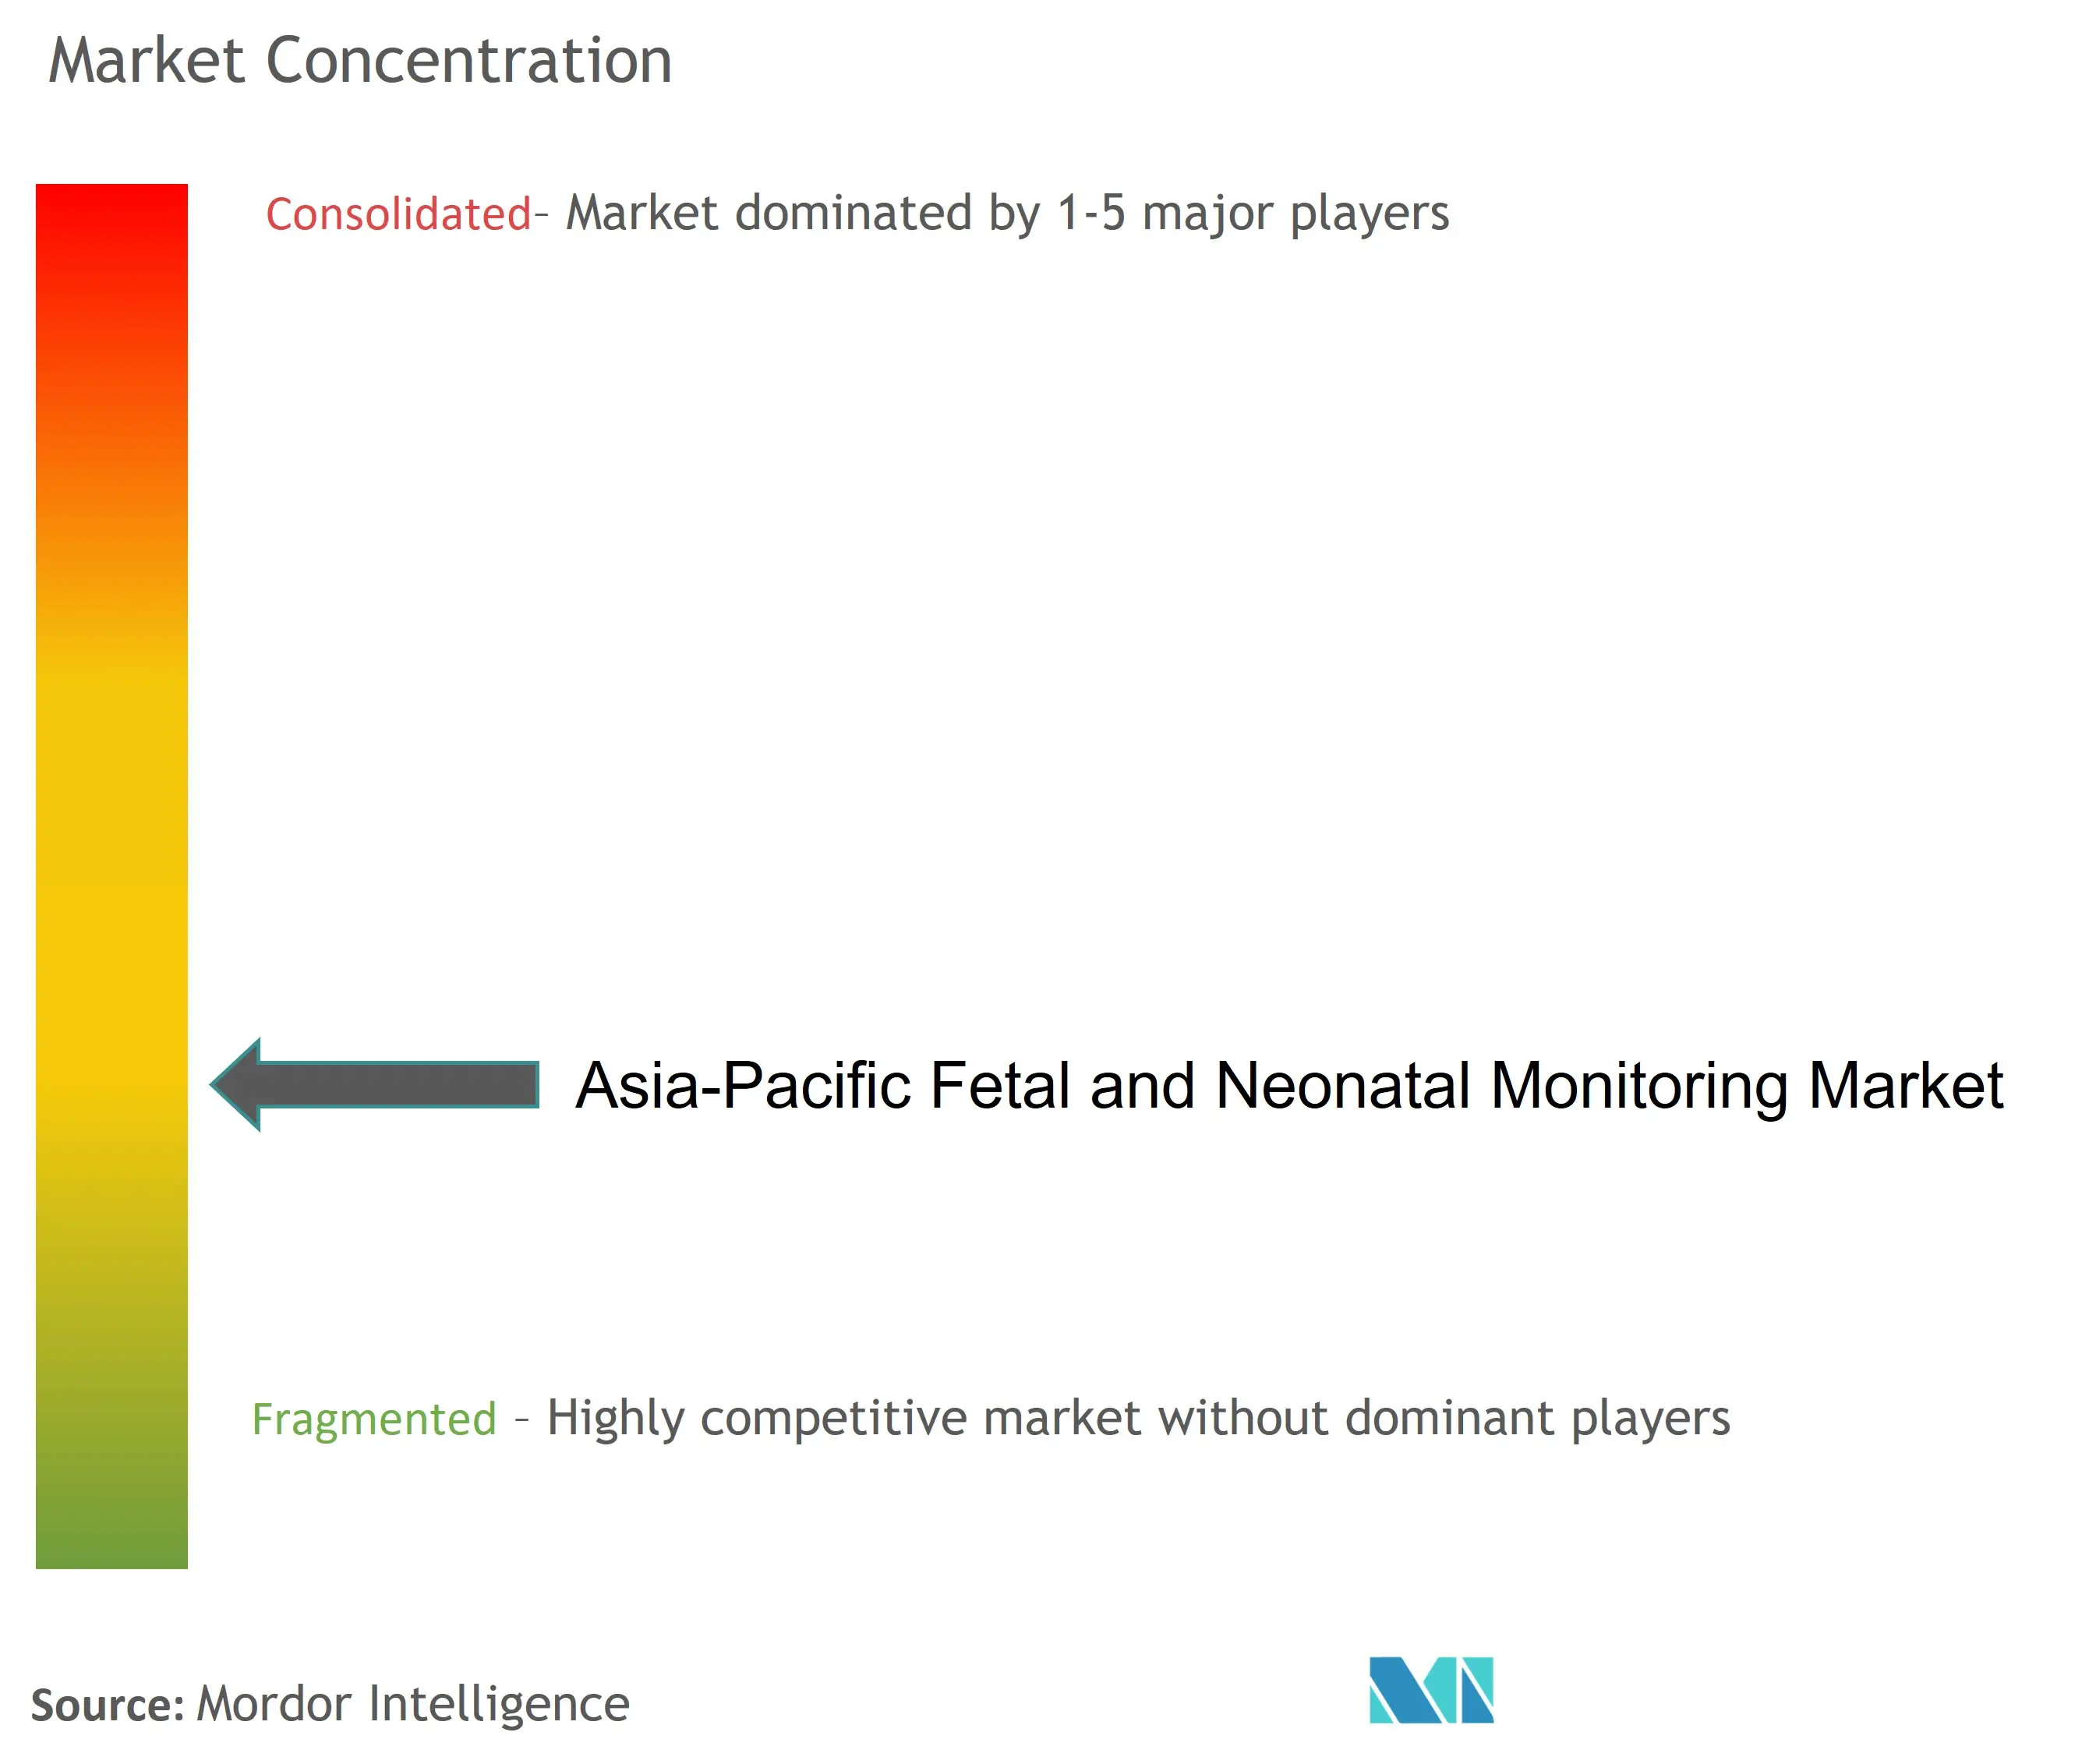 Asia-Pacific Fetal & Neonatal Monitoring Market Concentration